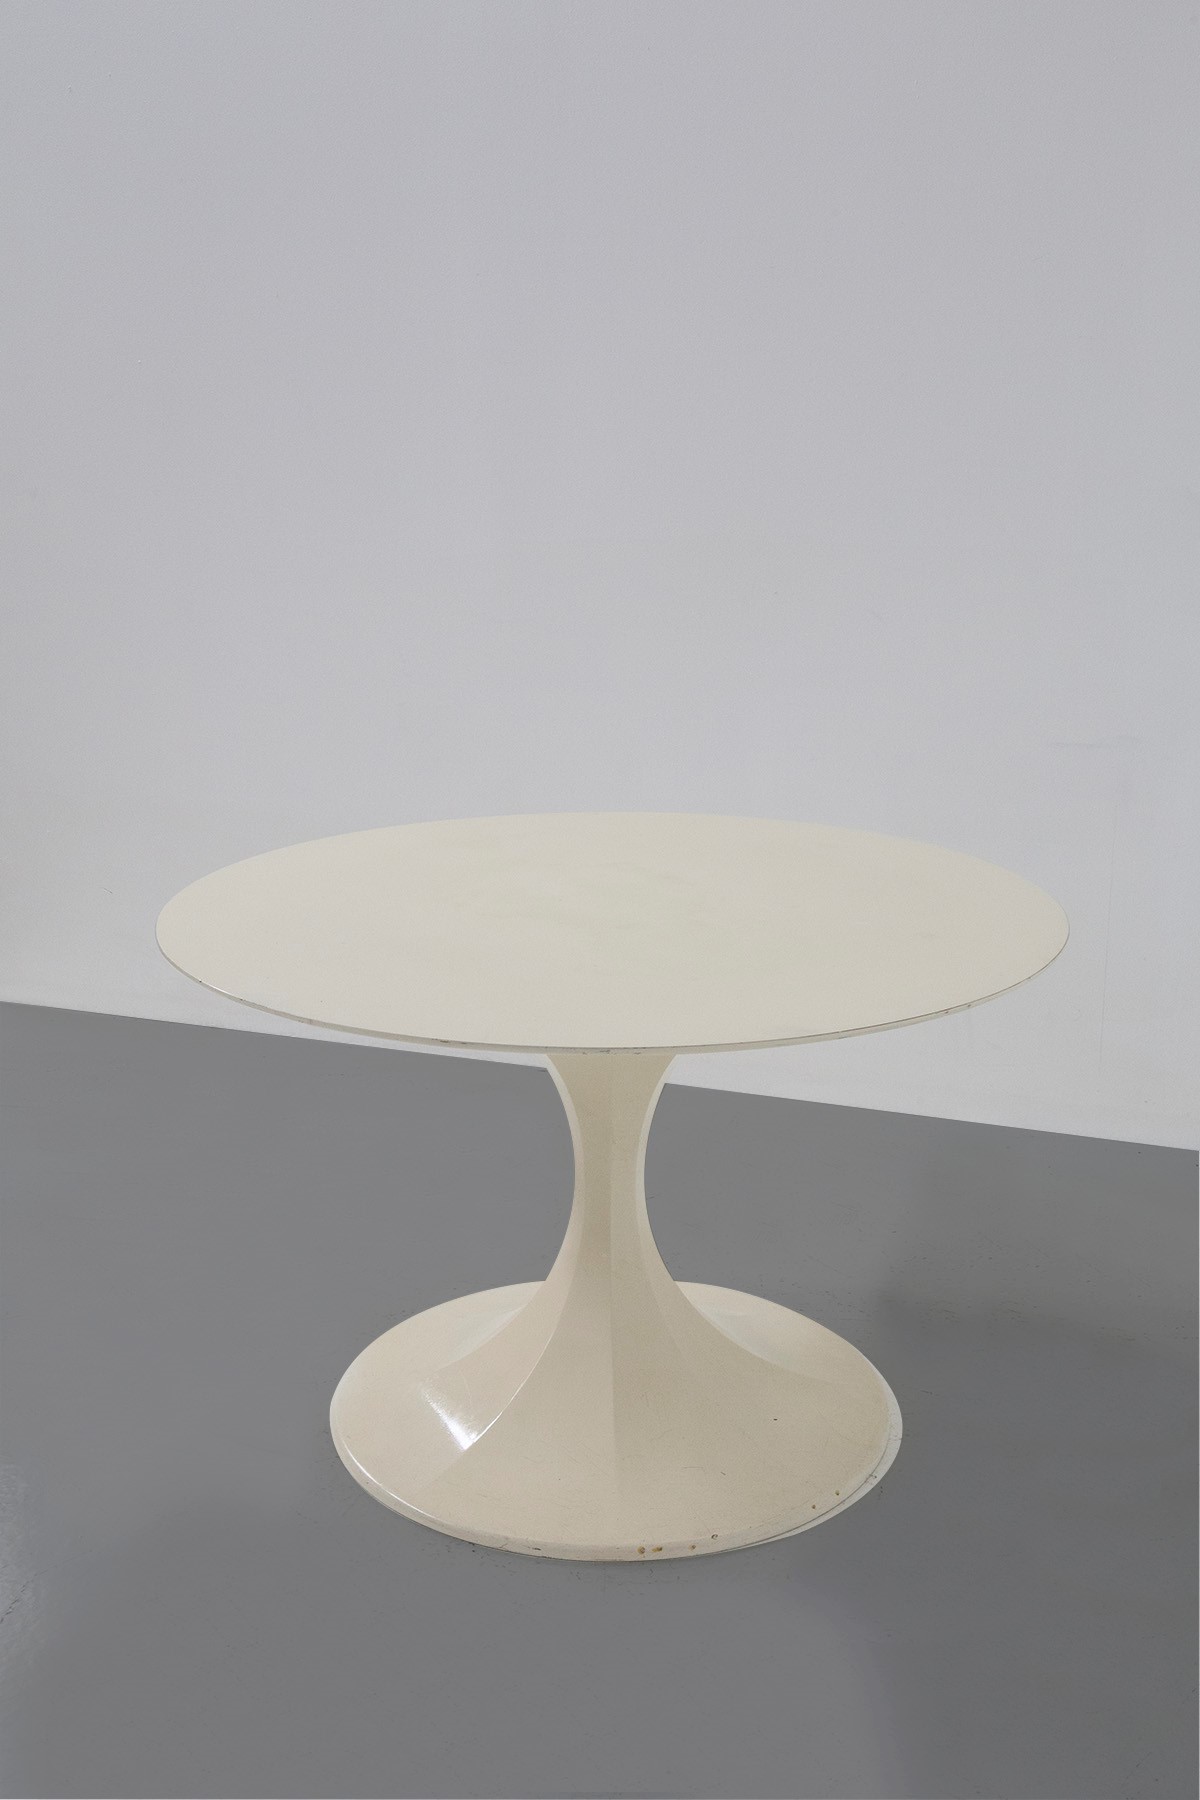 White circular resin and wood table, Italian manufacture   - Wood and resin - Auction MASTERPIECES & UNIQUE FINDS - LTWID Auction House